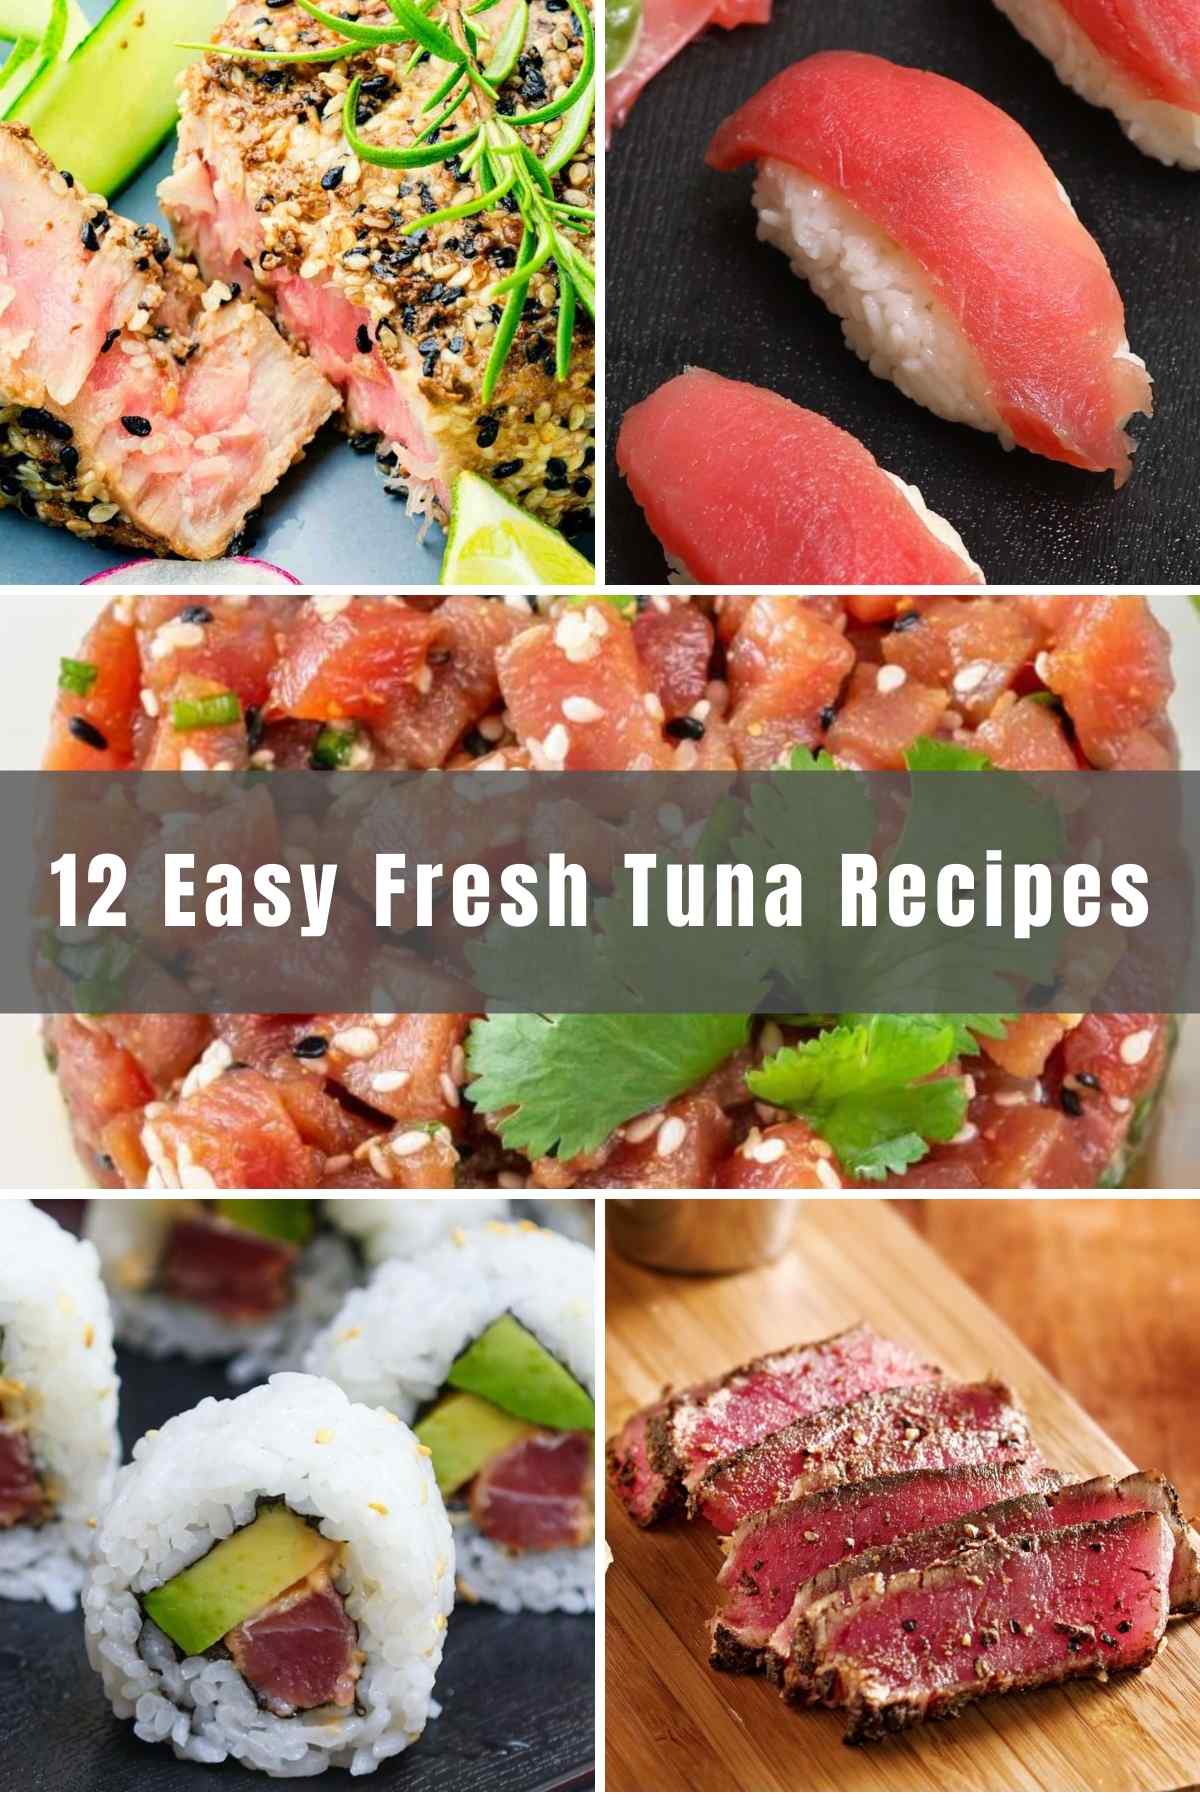 Are you looking for inspiration to prepare tuna just like the pros? Below you’ll find 12 Easy Fresh Tuna Recipes, from tuna steak to tuna tartare and even spicy tuna sushi rolls. We are not talking about the dry, flaky canned fish here. The joys of eating fresh tuna are almost indescribable, and there are plenty of ways to enjoy it for lunch and dinner without breaking a sweat!